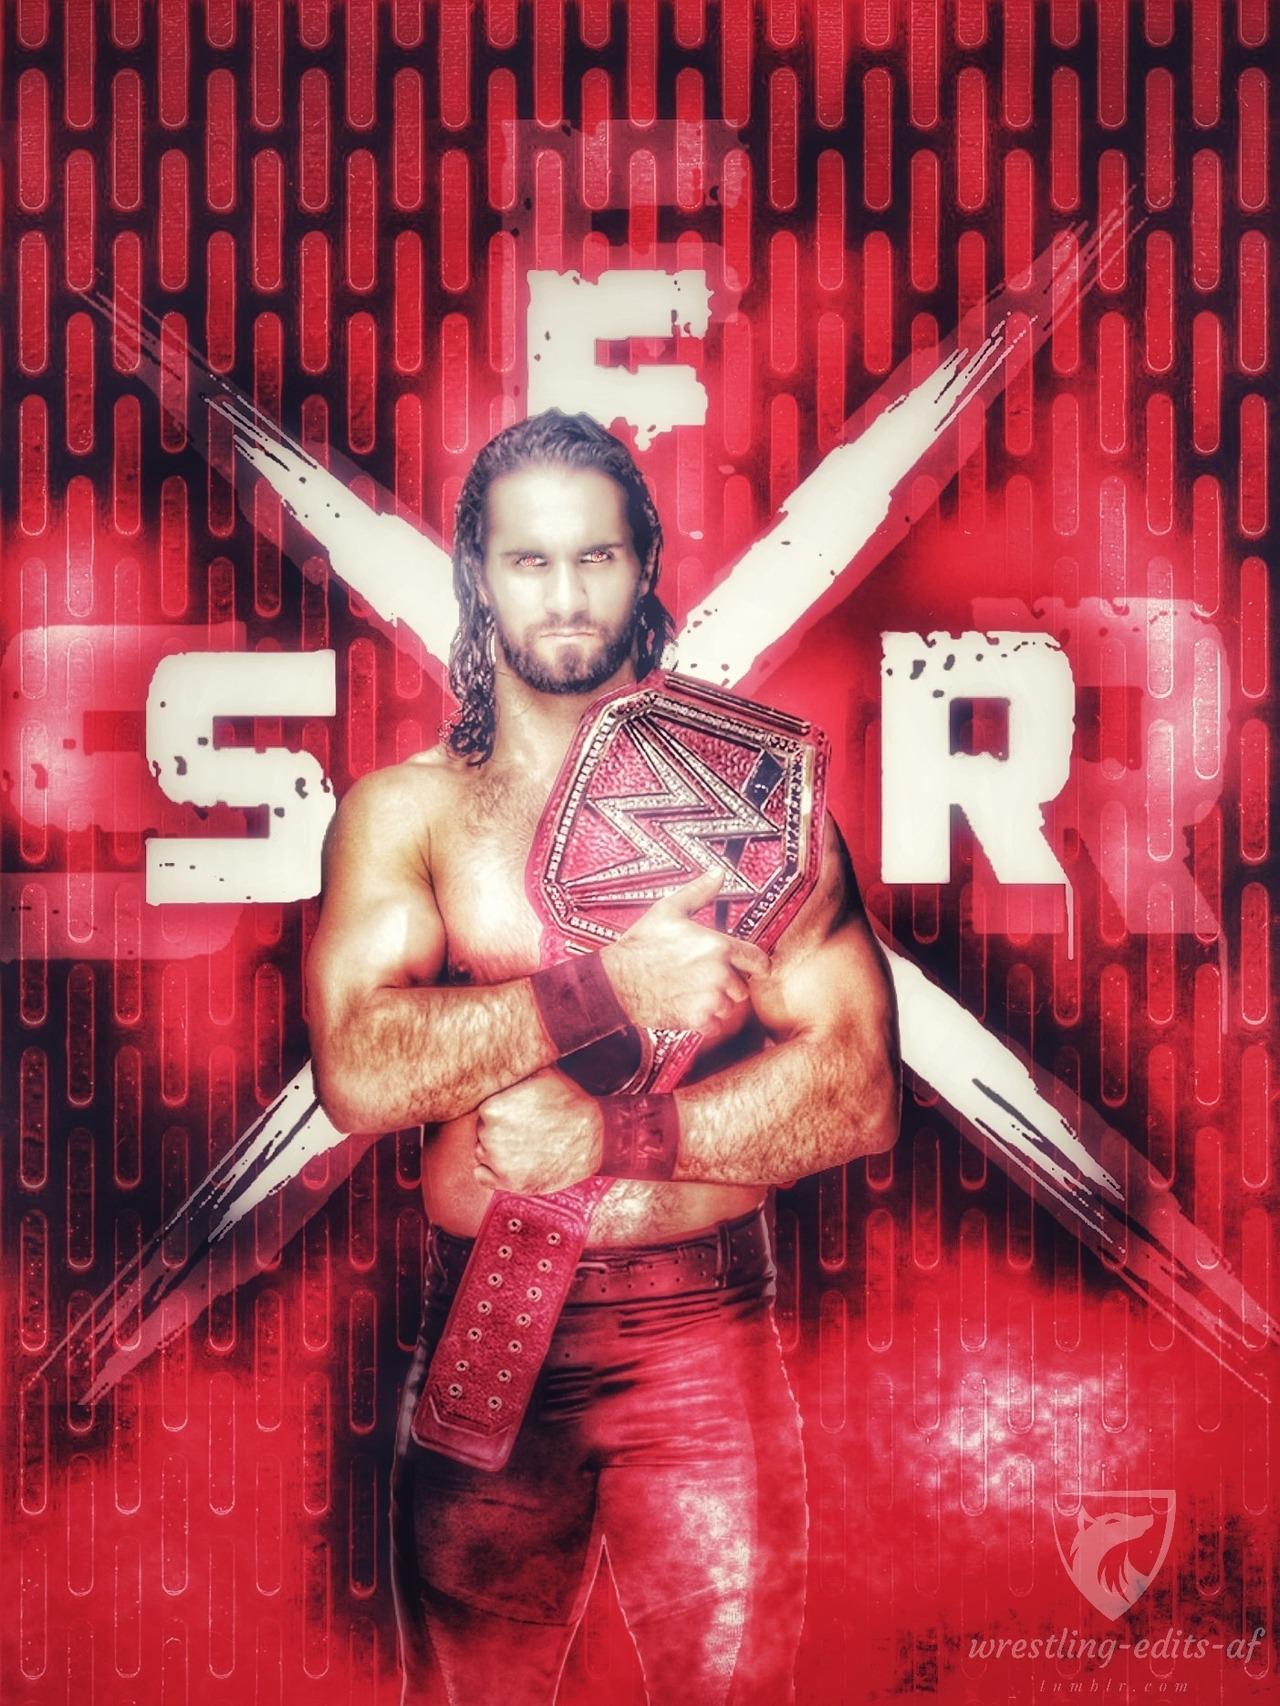 Seth Rollins Universal Champion Wallpapers Wallpaper Cave